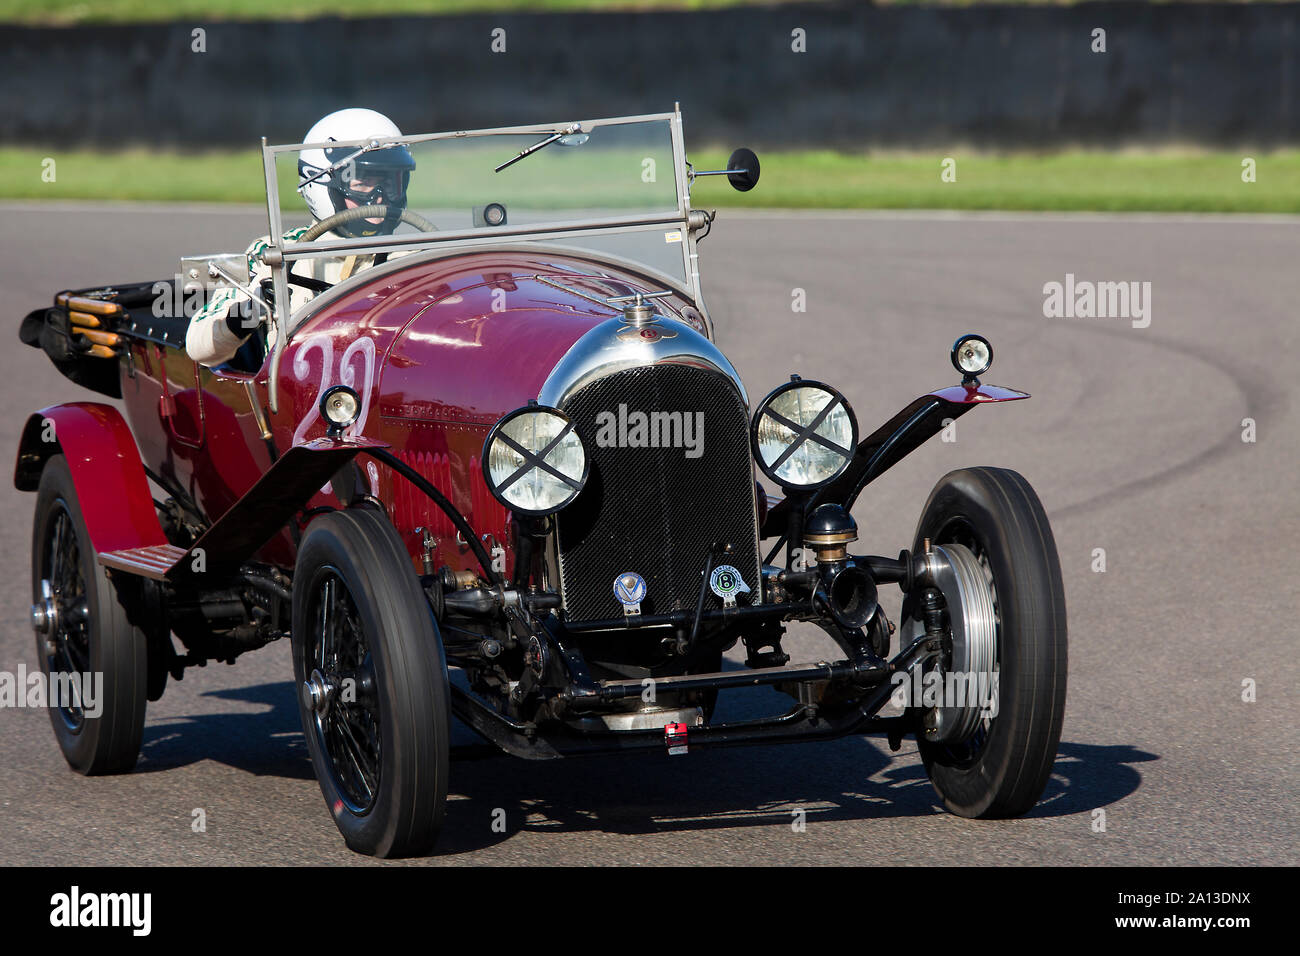 1924 Bentley 3 Litre driven by Gillian Carr in the Brooklands Trophy race at The Goodwood Revival 13th Sept 2019 in Chichester, England.  Copyright  M Stock Photo